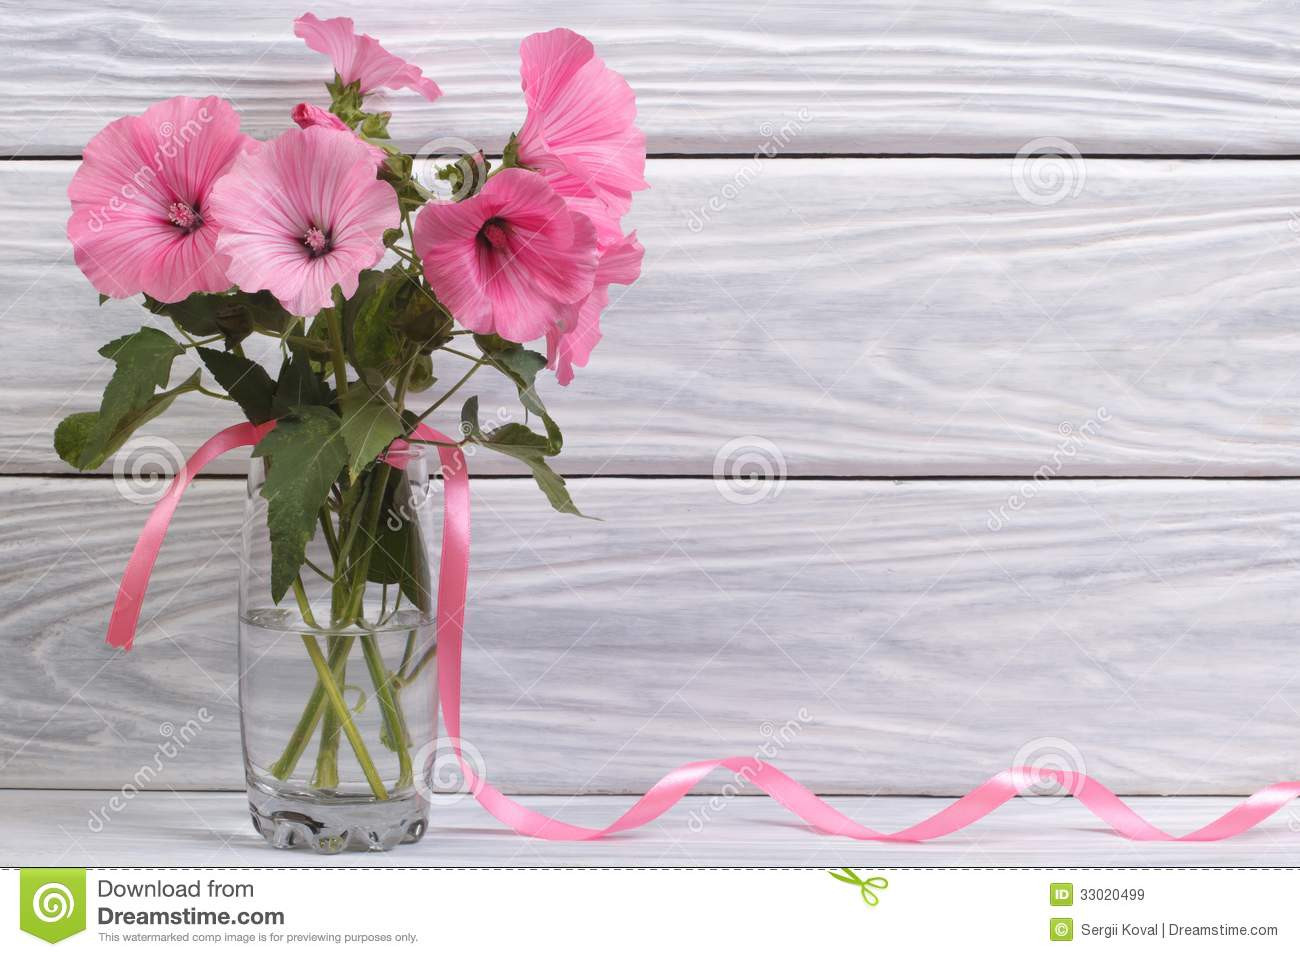 24 Lovable Pink Flowers In Glass Vase 2024 free download pink flowers in glass vase of lavatera pink flowers in a glass vase stock image image of bunch intended for lavatera pink flowers in a glass vase